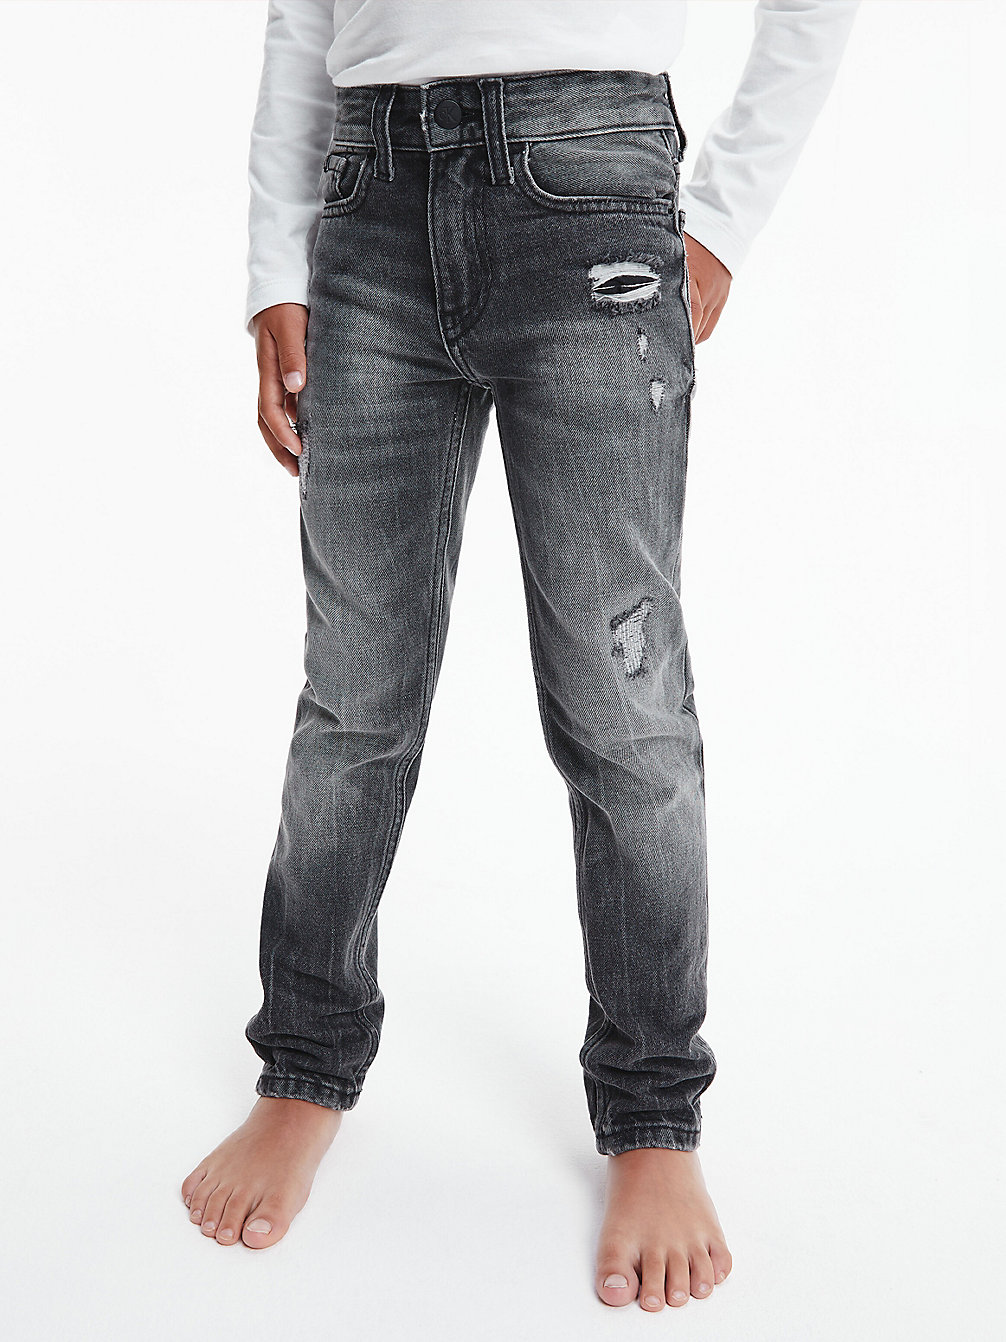 Mid Rise Slim Jeans > WASHED GREY DESTRUCTED > undefined nino > Calvin Klein